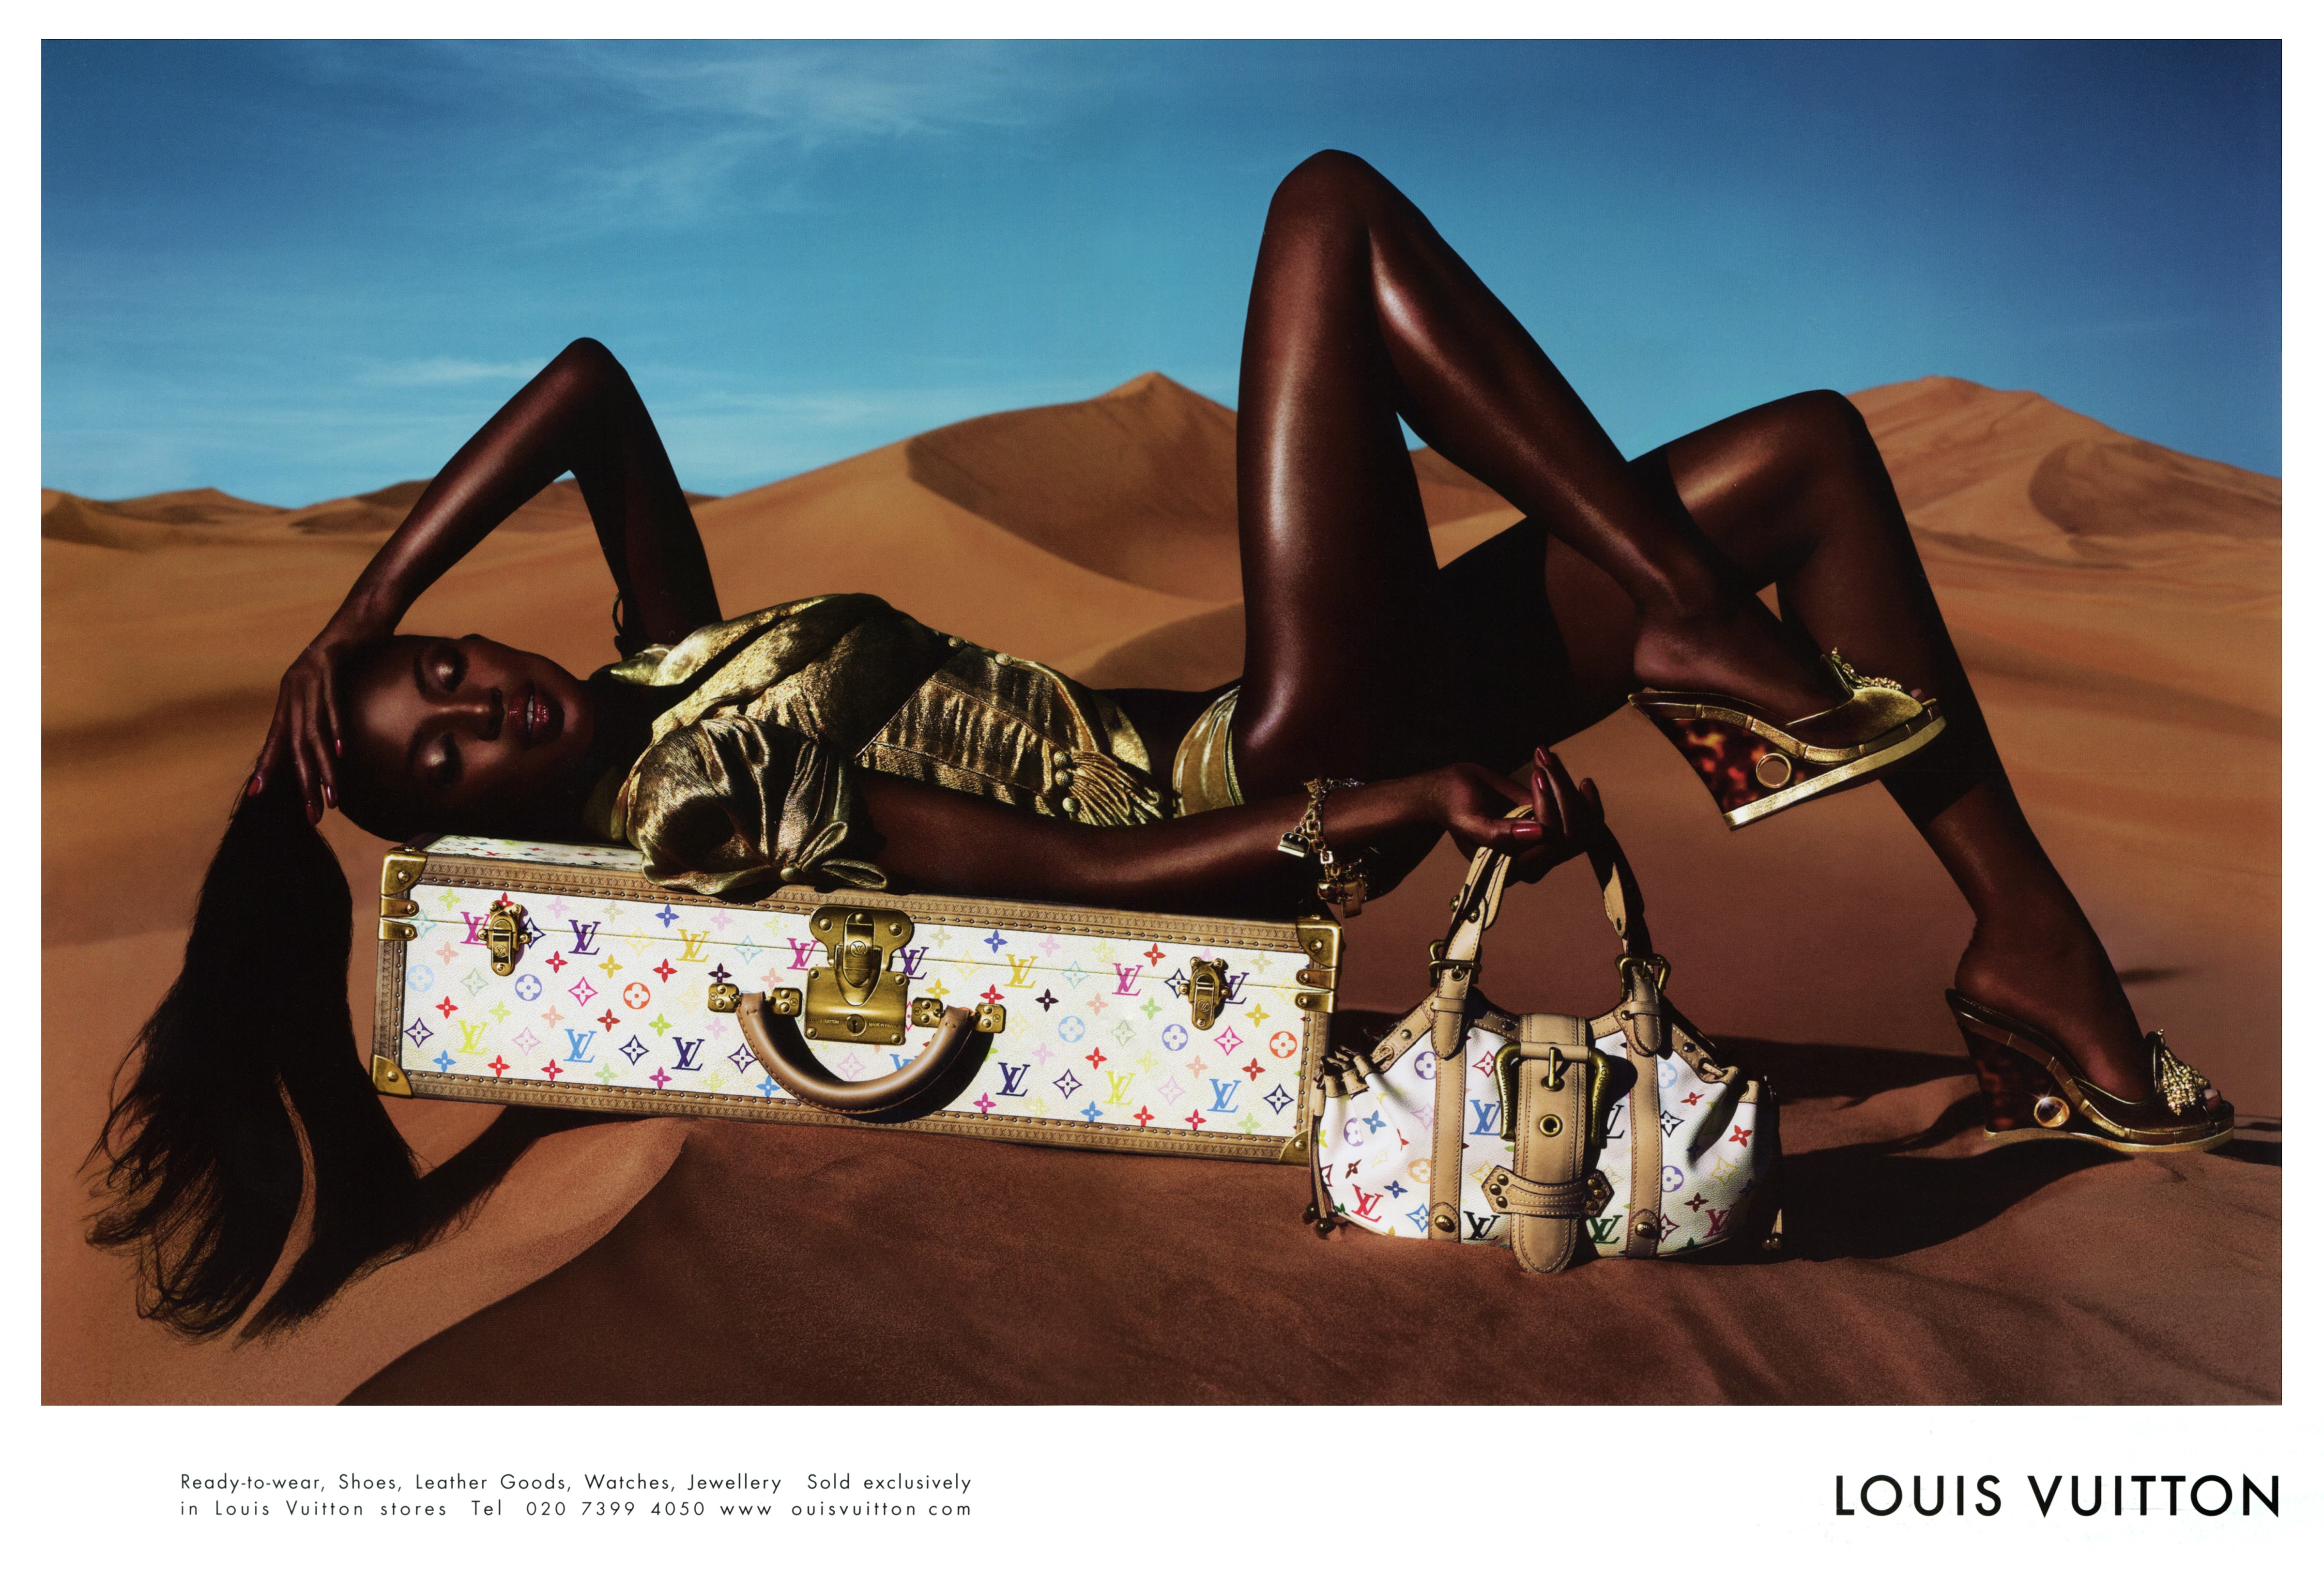 LOUIS VUITTON 2-Page Magazine PRINT AD Spring 2008 ANGELA LINDVALL ankle  foot